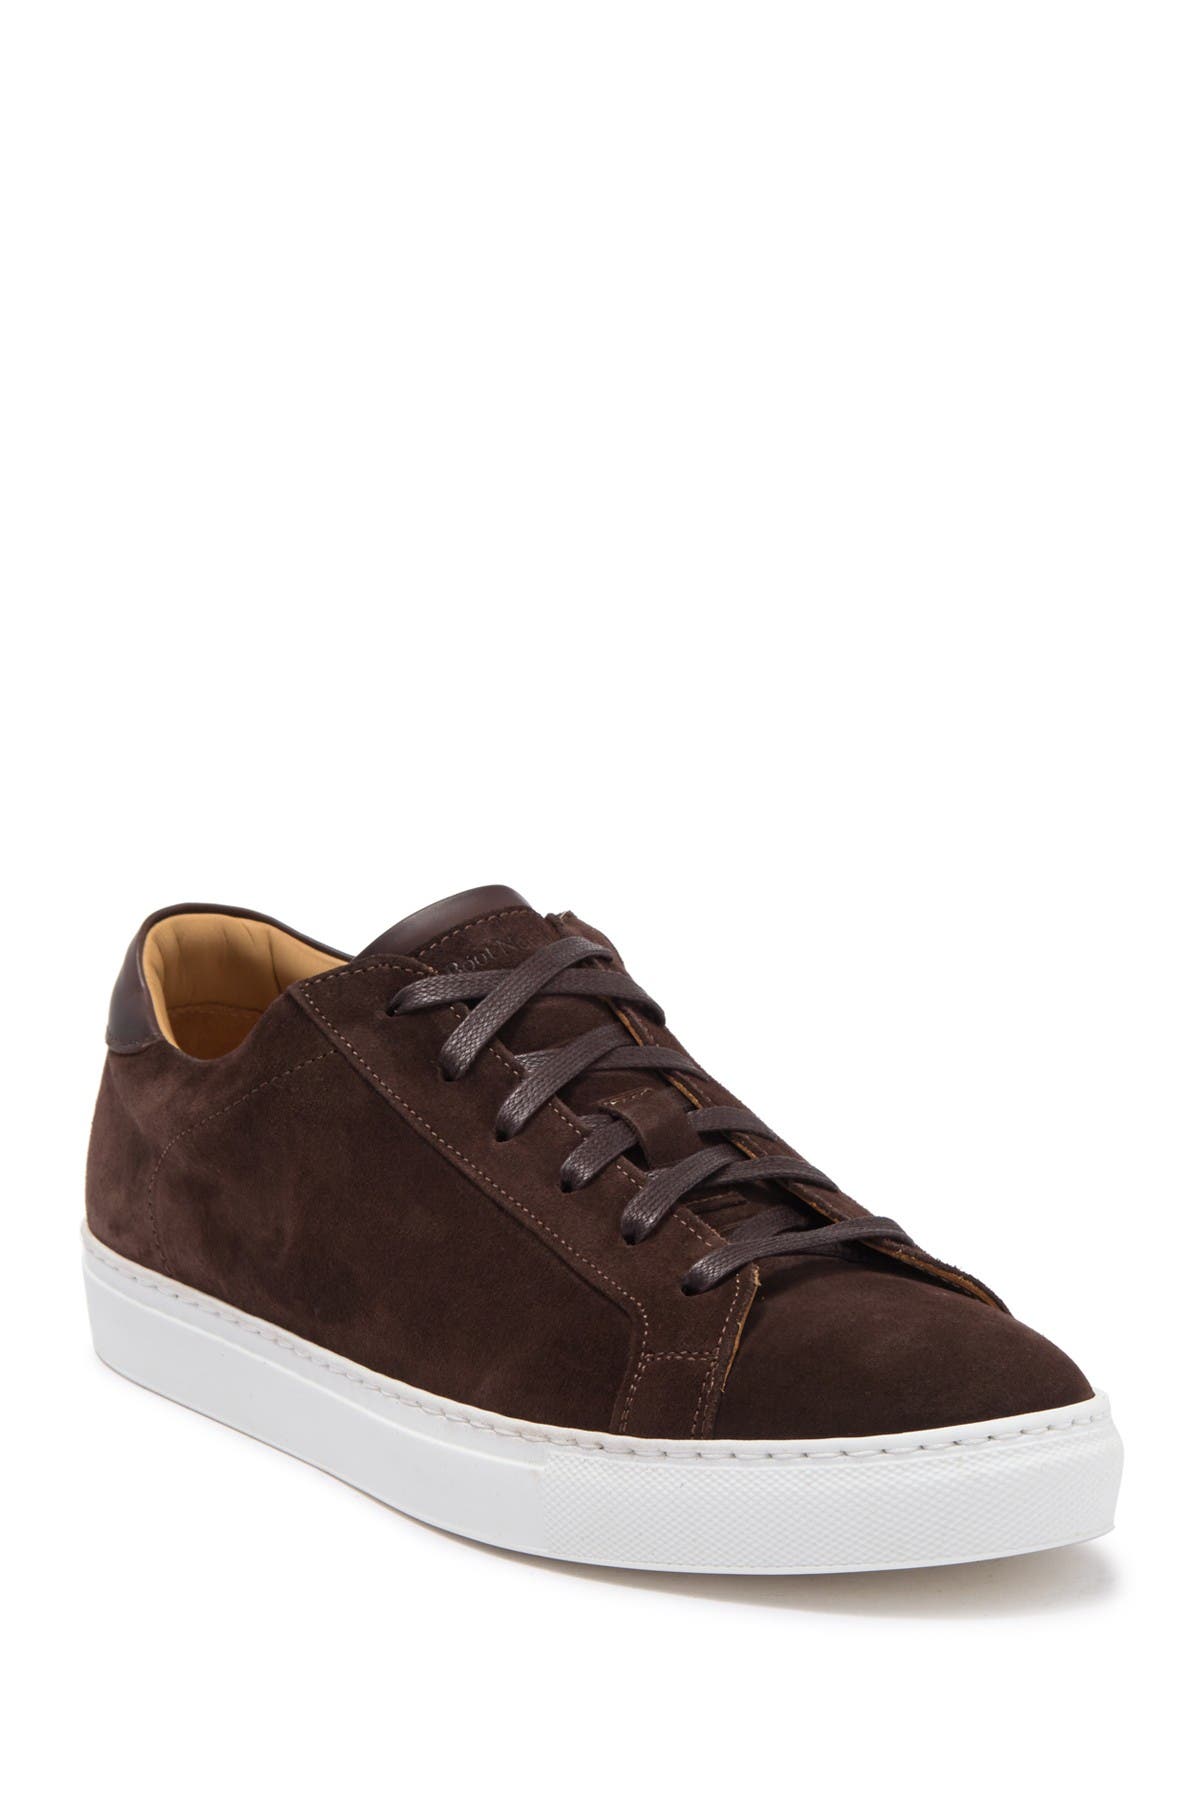 To Boot New York Devin Leather Sneaker In Ebano F.725